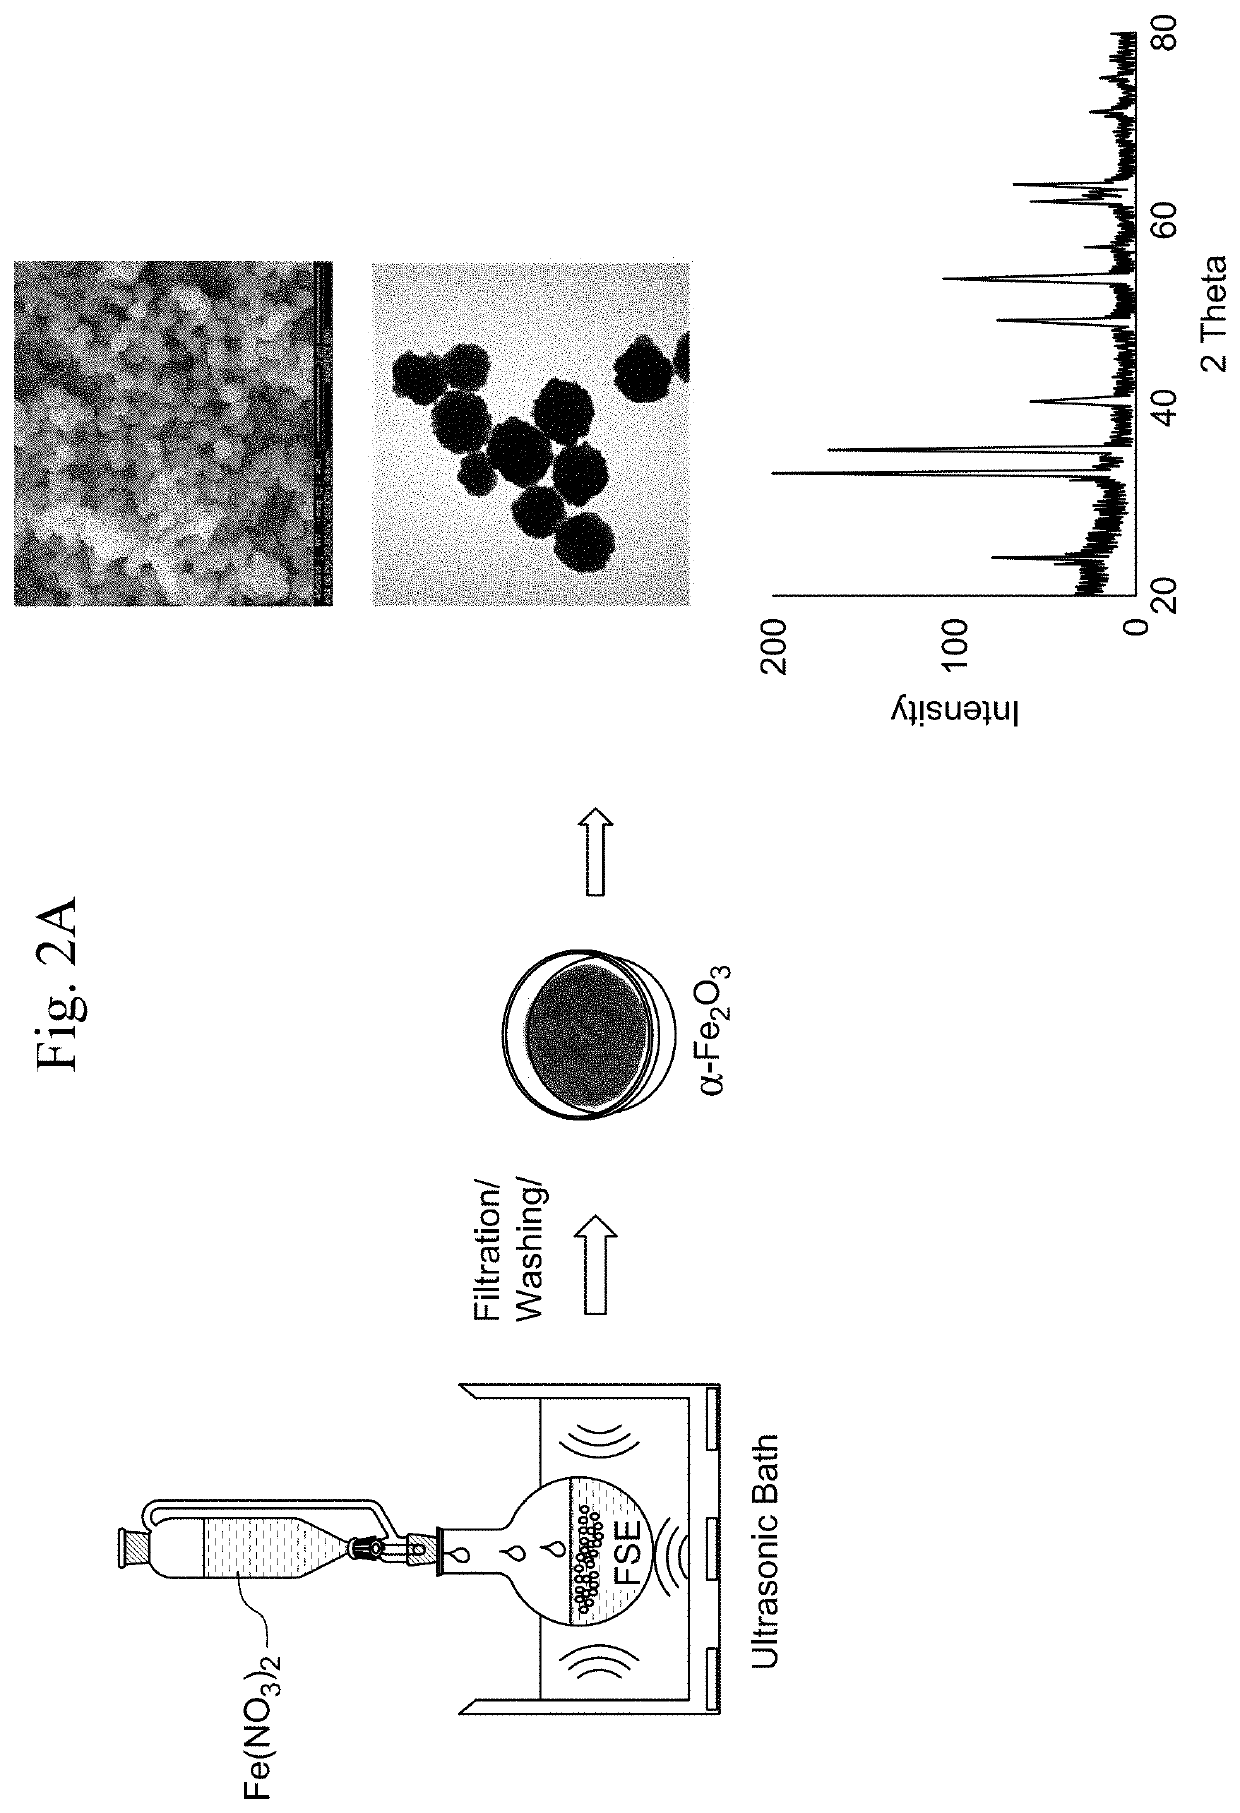 Alpha-FE2O3 nanoparticles and method of making and use thereof in photodegradation of organic pollutants, as a photocatalyst and as an antibacterial composition